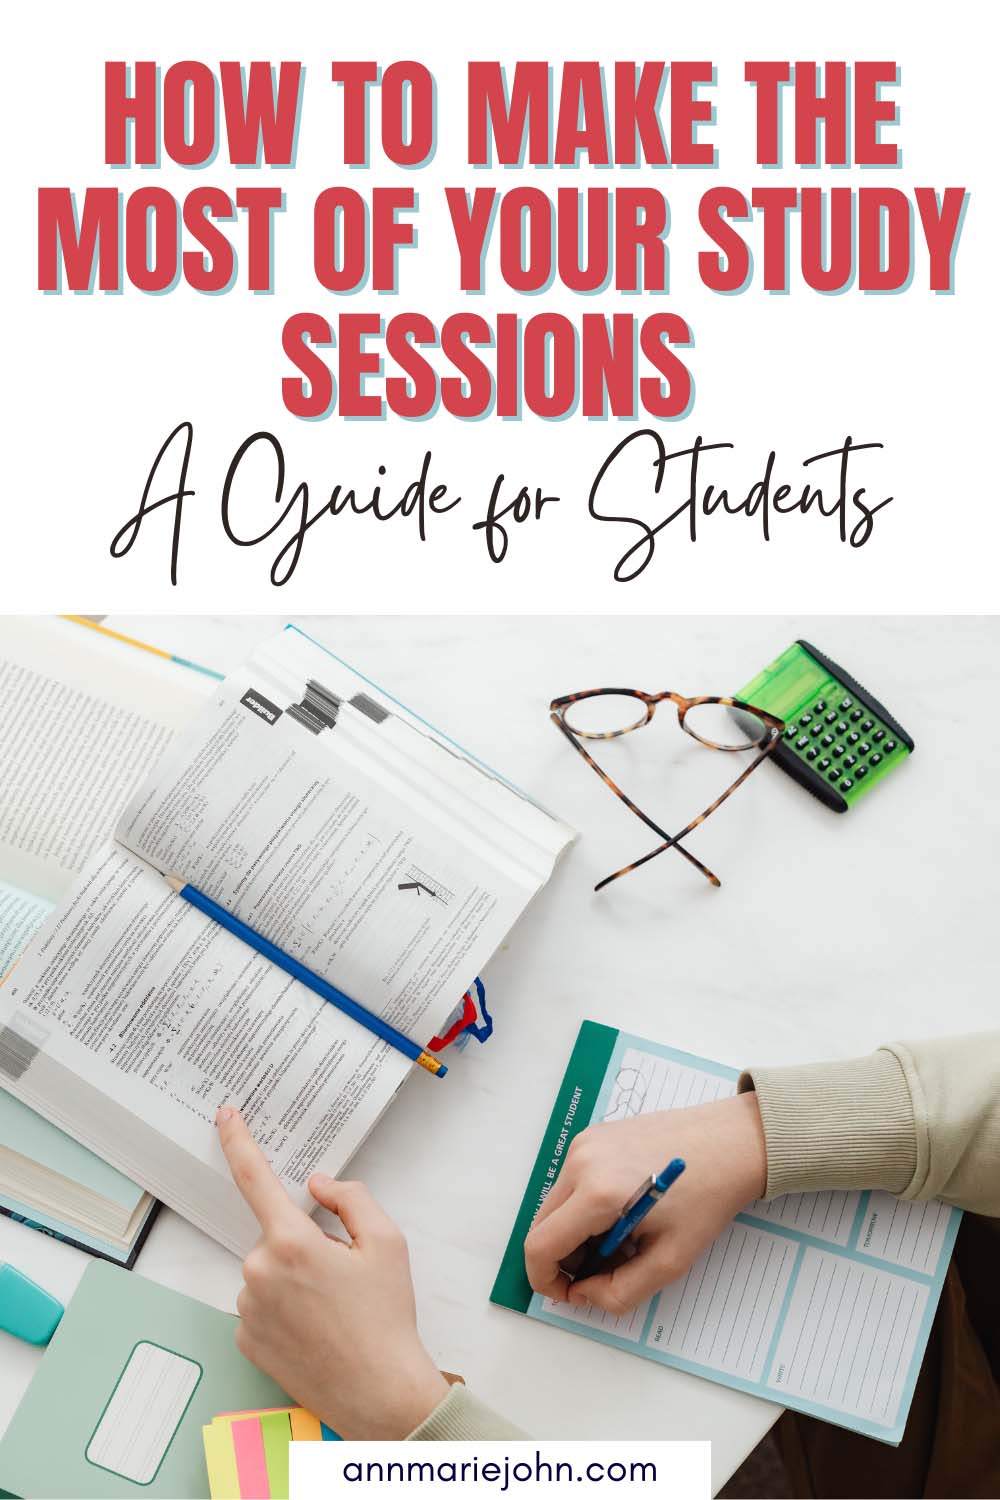 How to Make the Most of Your Study Sessions